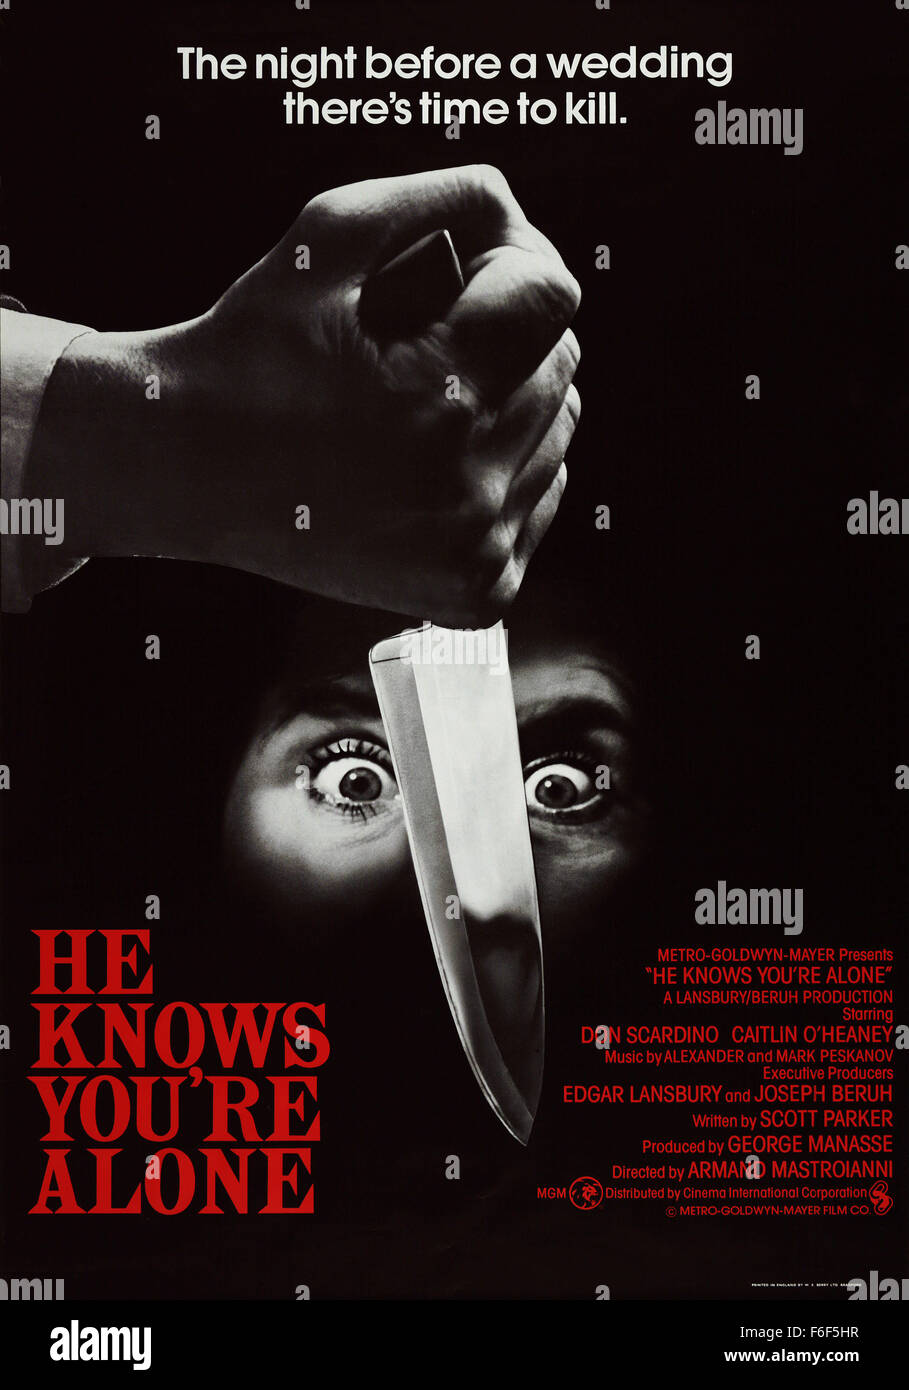 RELEASE DATE: September 12, 1980   MOVIE TITLE: HE Knows You're Alone   STUDIO: Metro-Goldwyn-Mayer (MGM)   DIRECTOR: Armand Mastroianni  PLOT: A reluctant bride to be is stalked by a serial killer who only kills brides and the people around them. While her friends get whacked one by one, a hard boiled renegade cop whose bride had been killed years before tries to hunt him down before it is too late. Meanwhile, the bride has to figure out if it is all in her imagination or not, aided by her ex-boyfriend   PICTURED: CATLIN O'HEANEY as Amy Jensen   (Credit Image: c Metro-Goldwyn-Mayer (MGM)/Ente Stock Photo